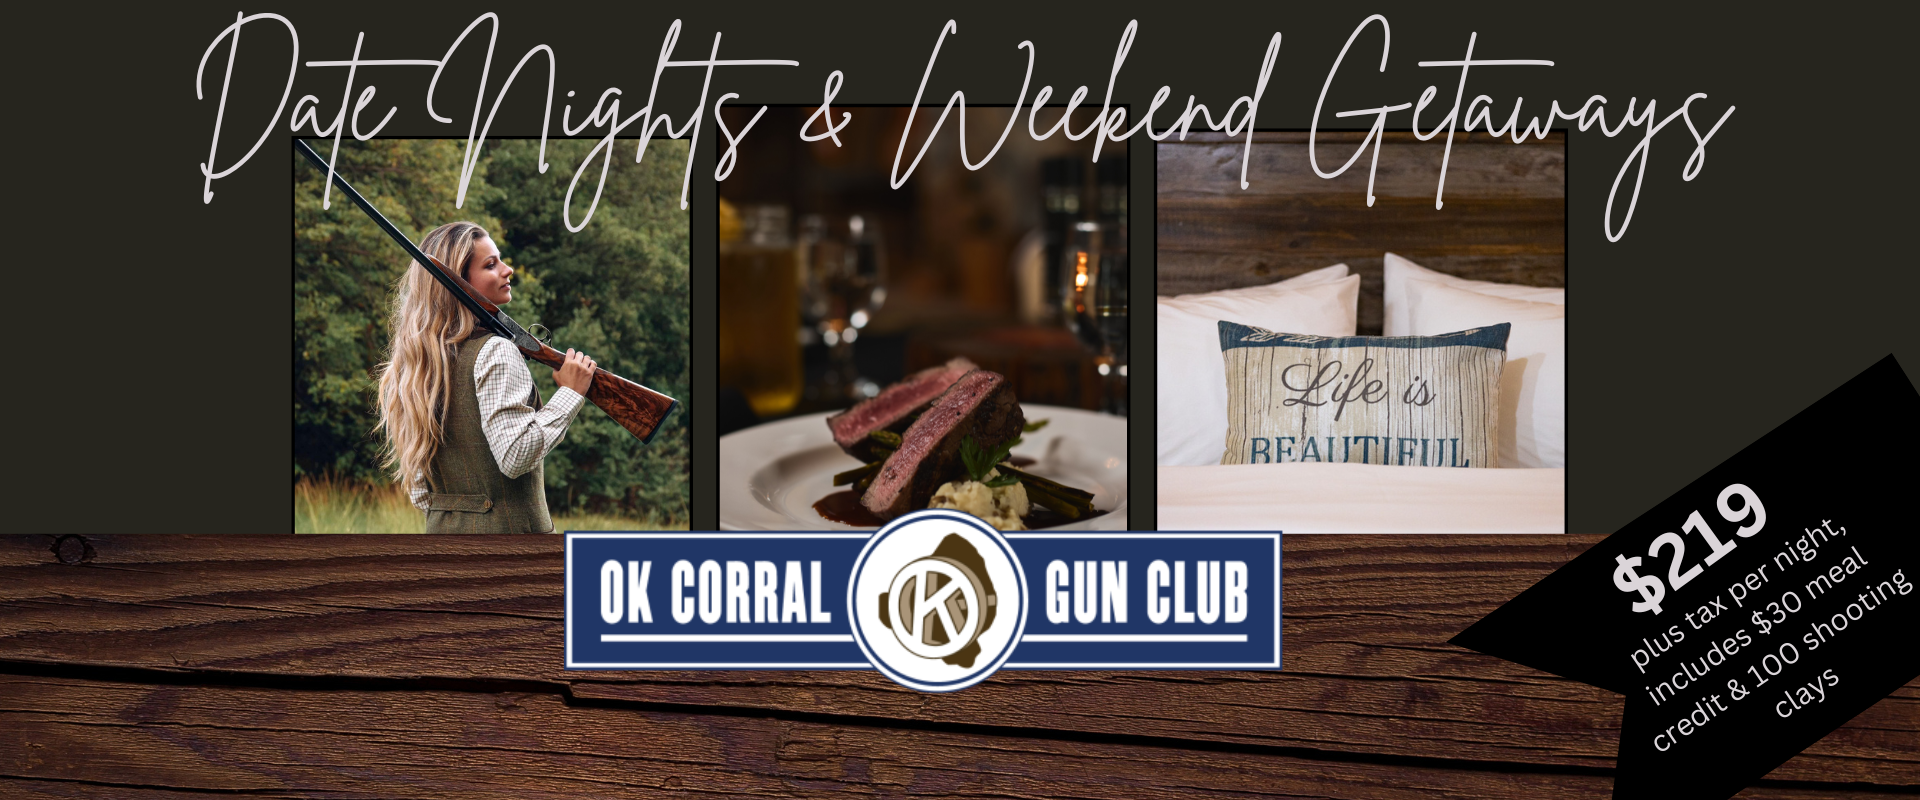 date-nights-weekend-getaways-OK-Corral-Gun-Club-$219-a-night-plus-tax-including-$30-meal-credit-and-100-shooting-clays